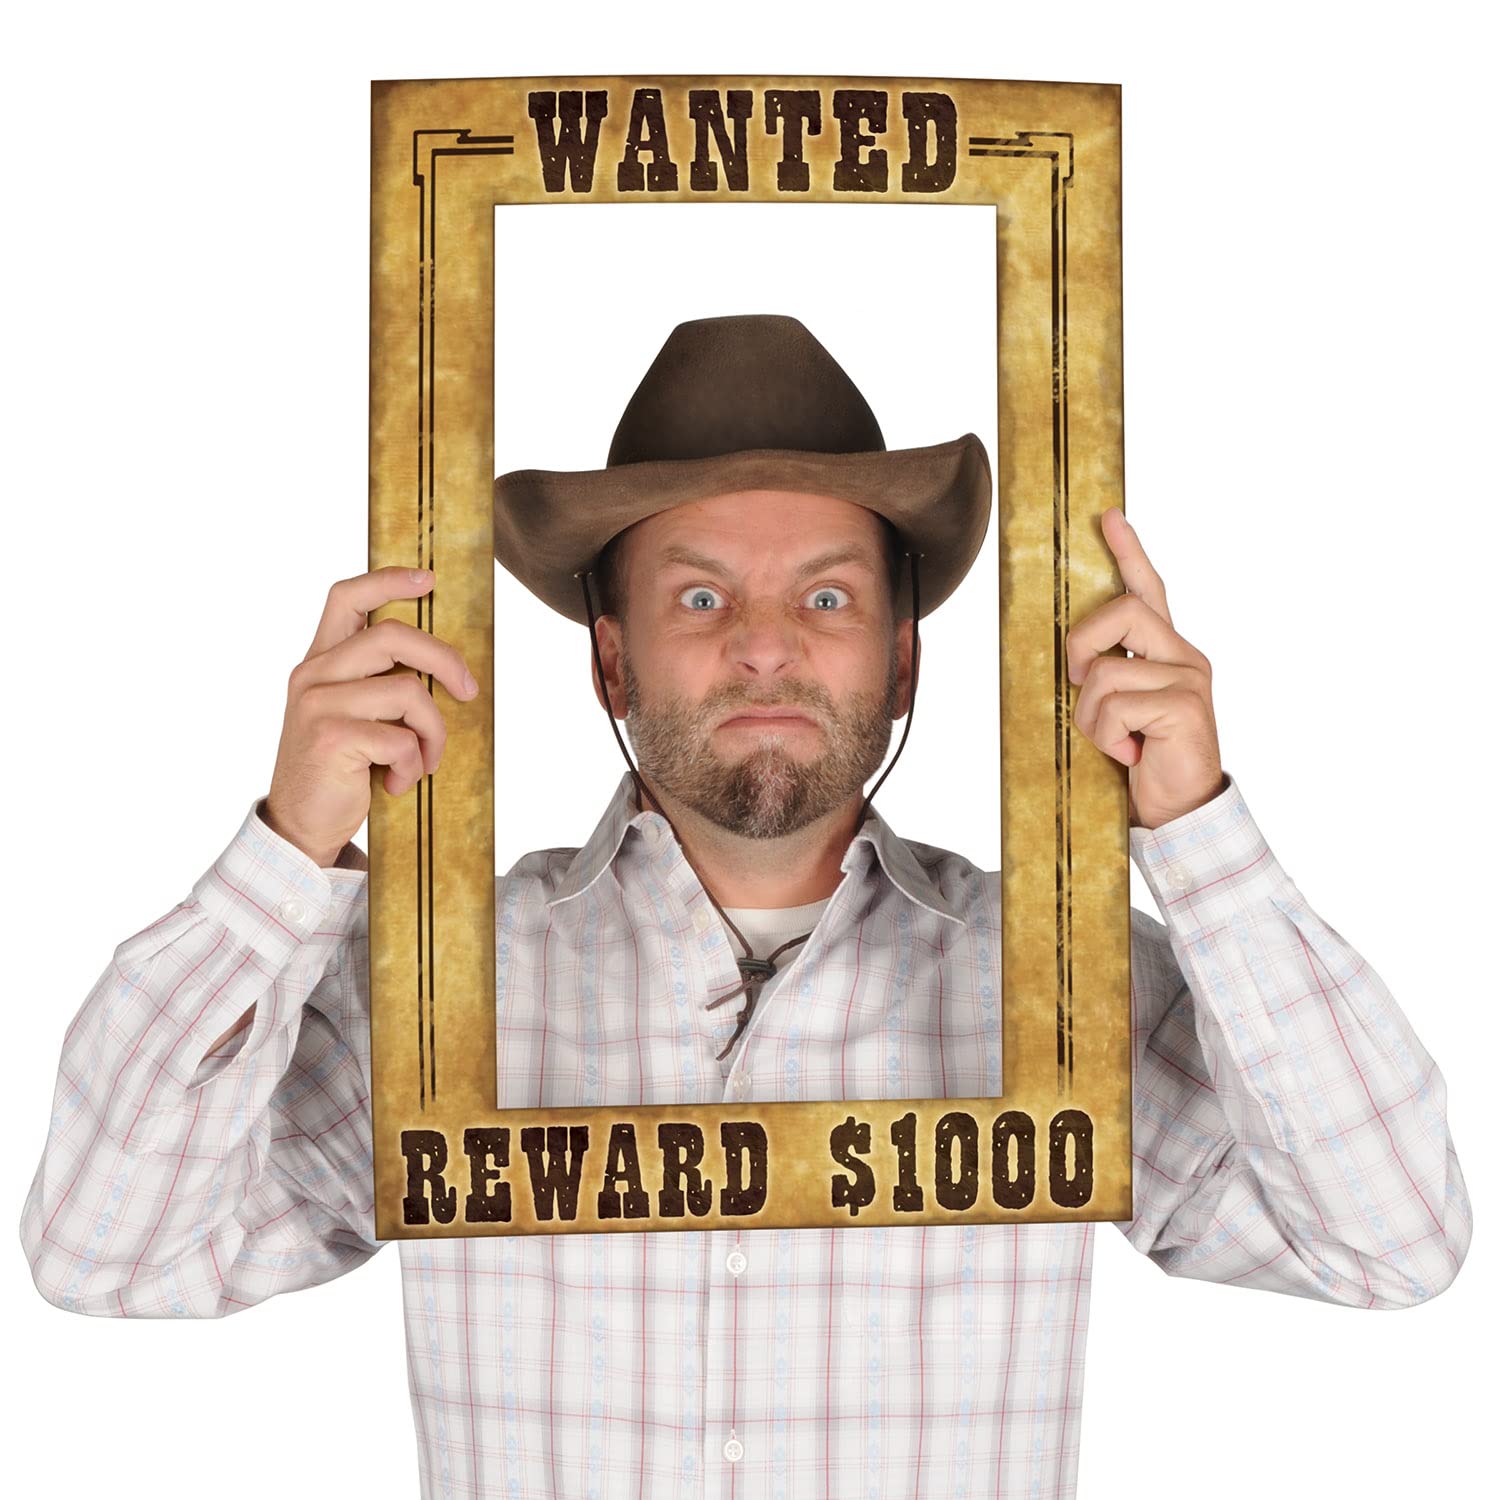 Beistle 2 Piece Wanted Photo Booth Selfie Frames for Wild West Cowboy Western Party Supplies, 23.5